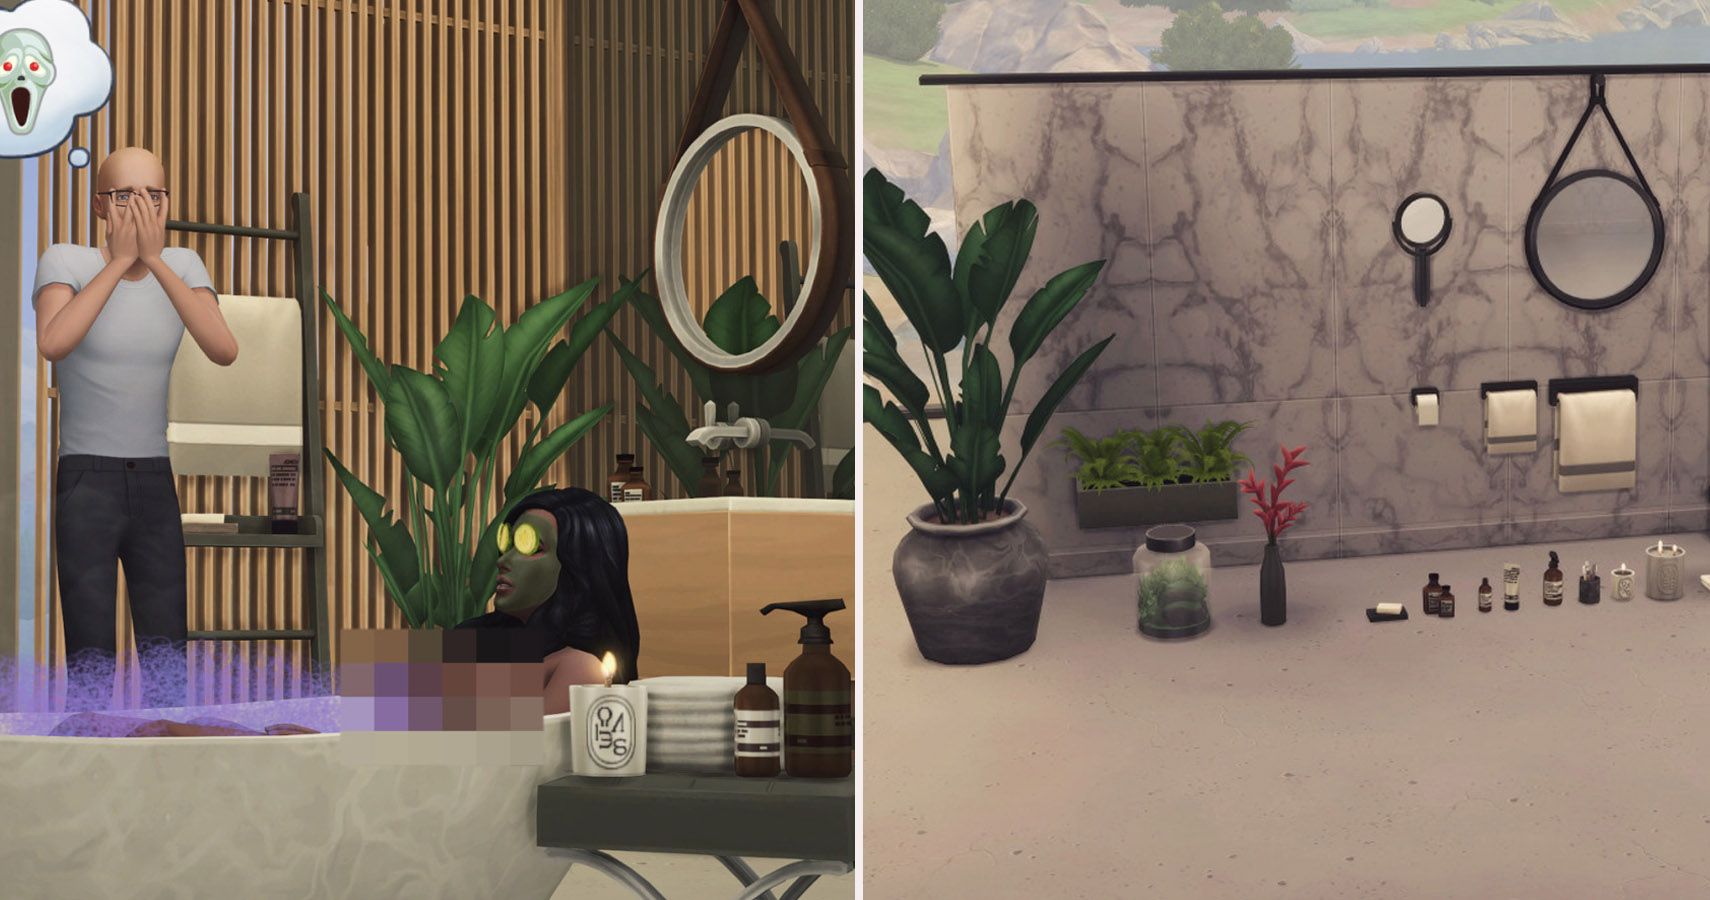 Left side render of a sim in the bath while another looks on. Right side bathroom clutter items on a shelf.